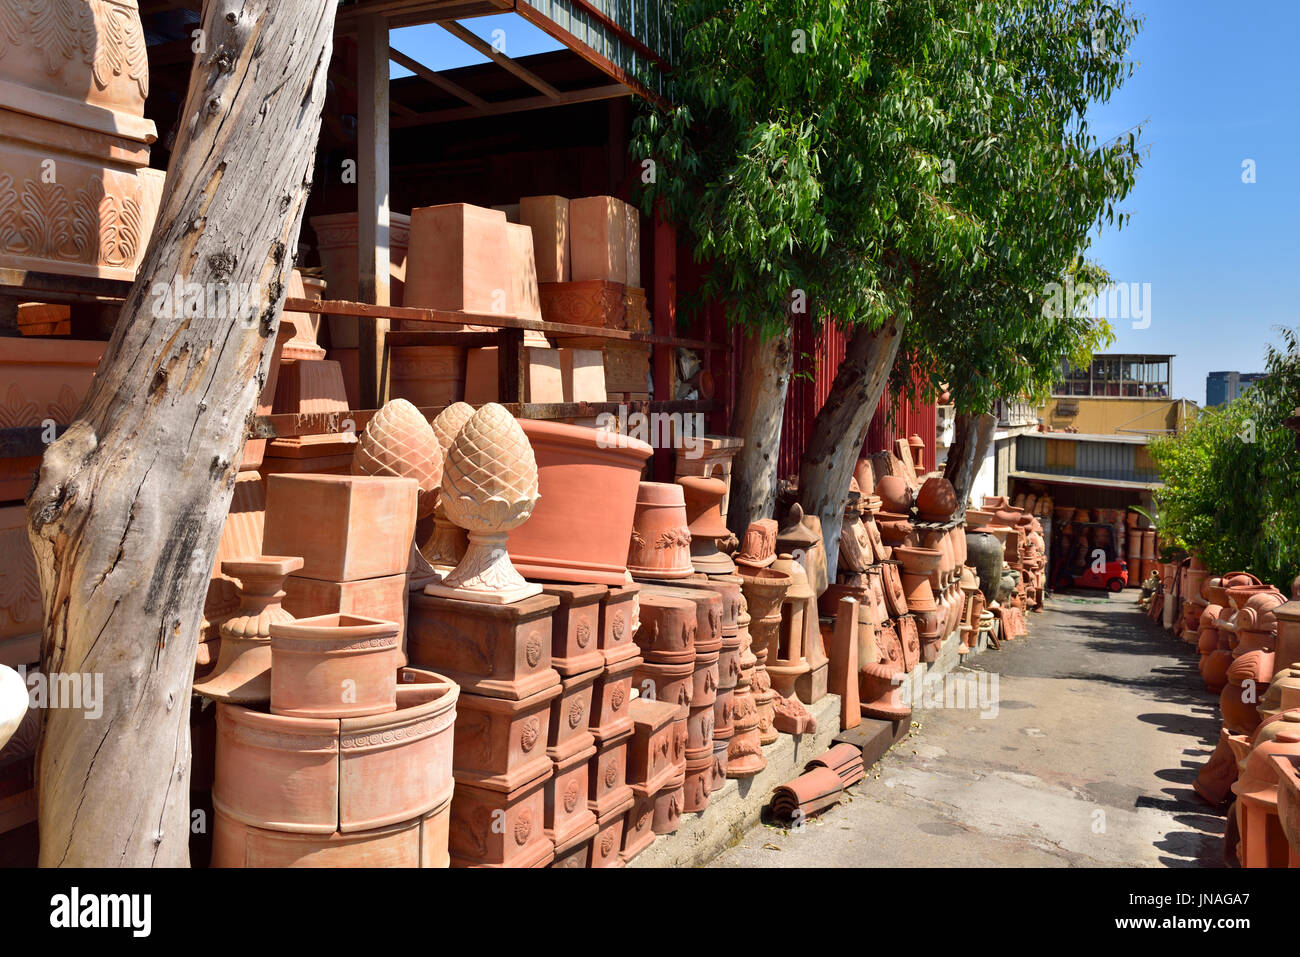 Vary large selection of terracotta pots Naples being sold by store, 'Faraone Terracotta', Italy Stock Photo